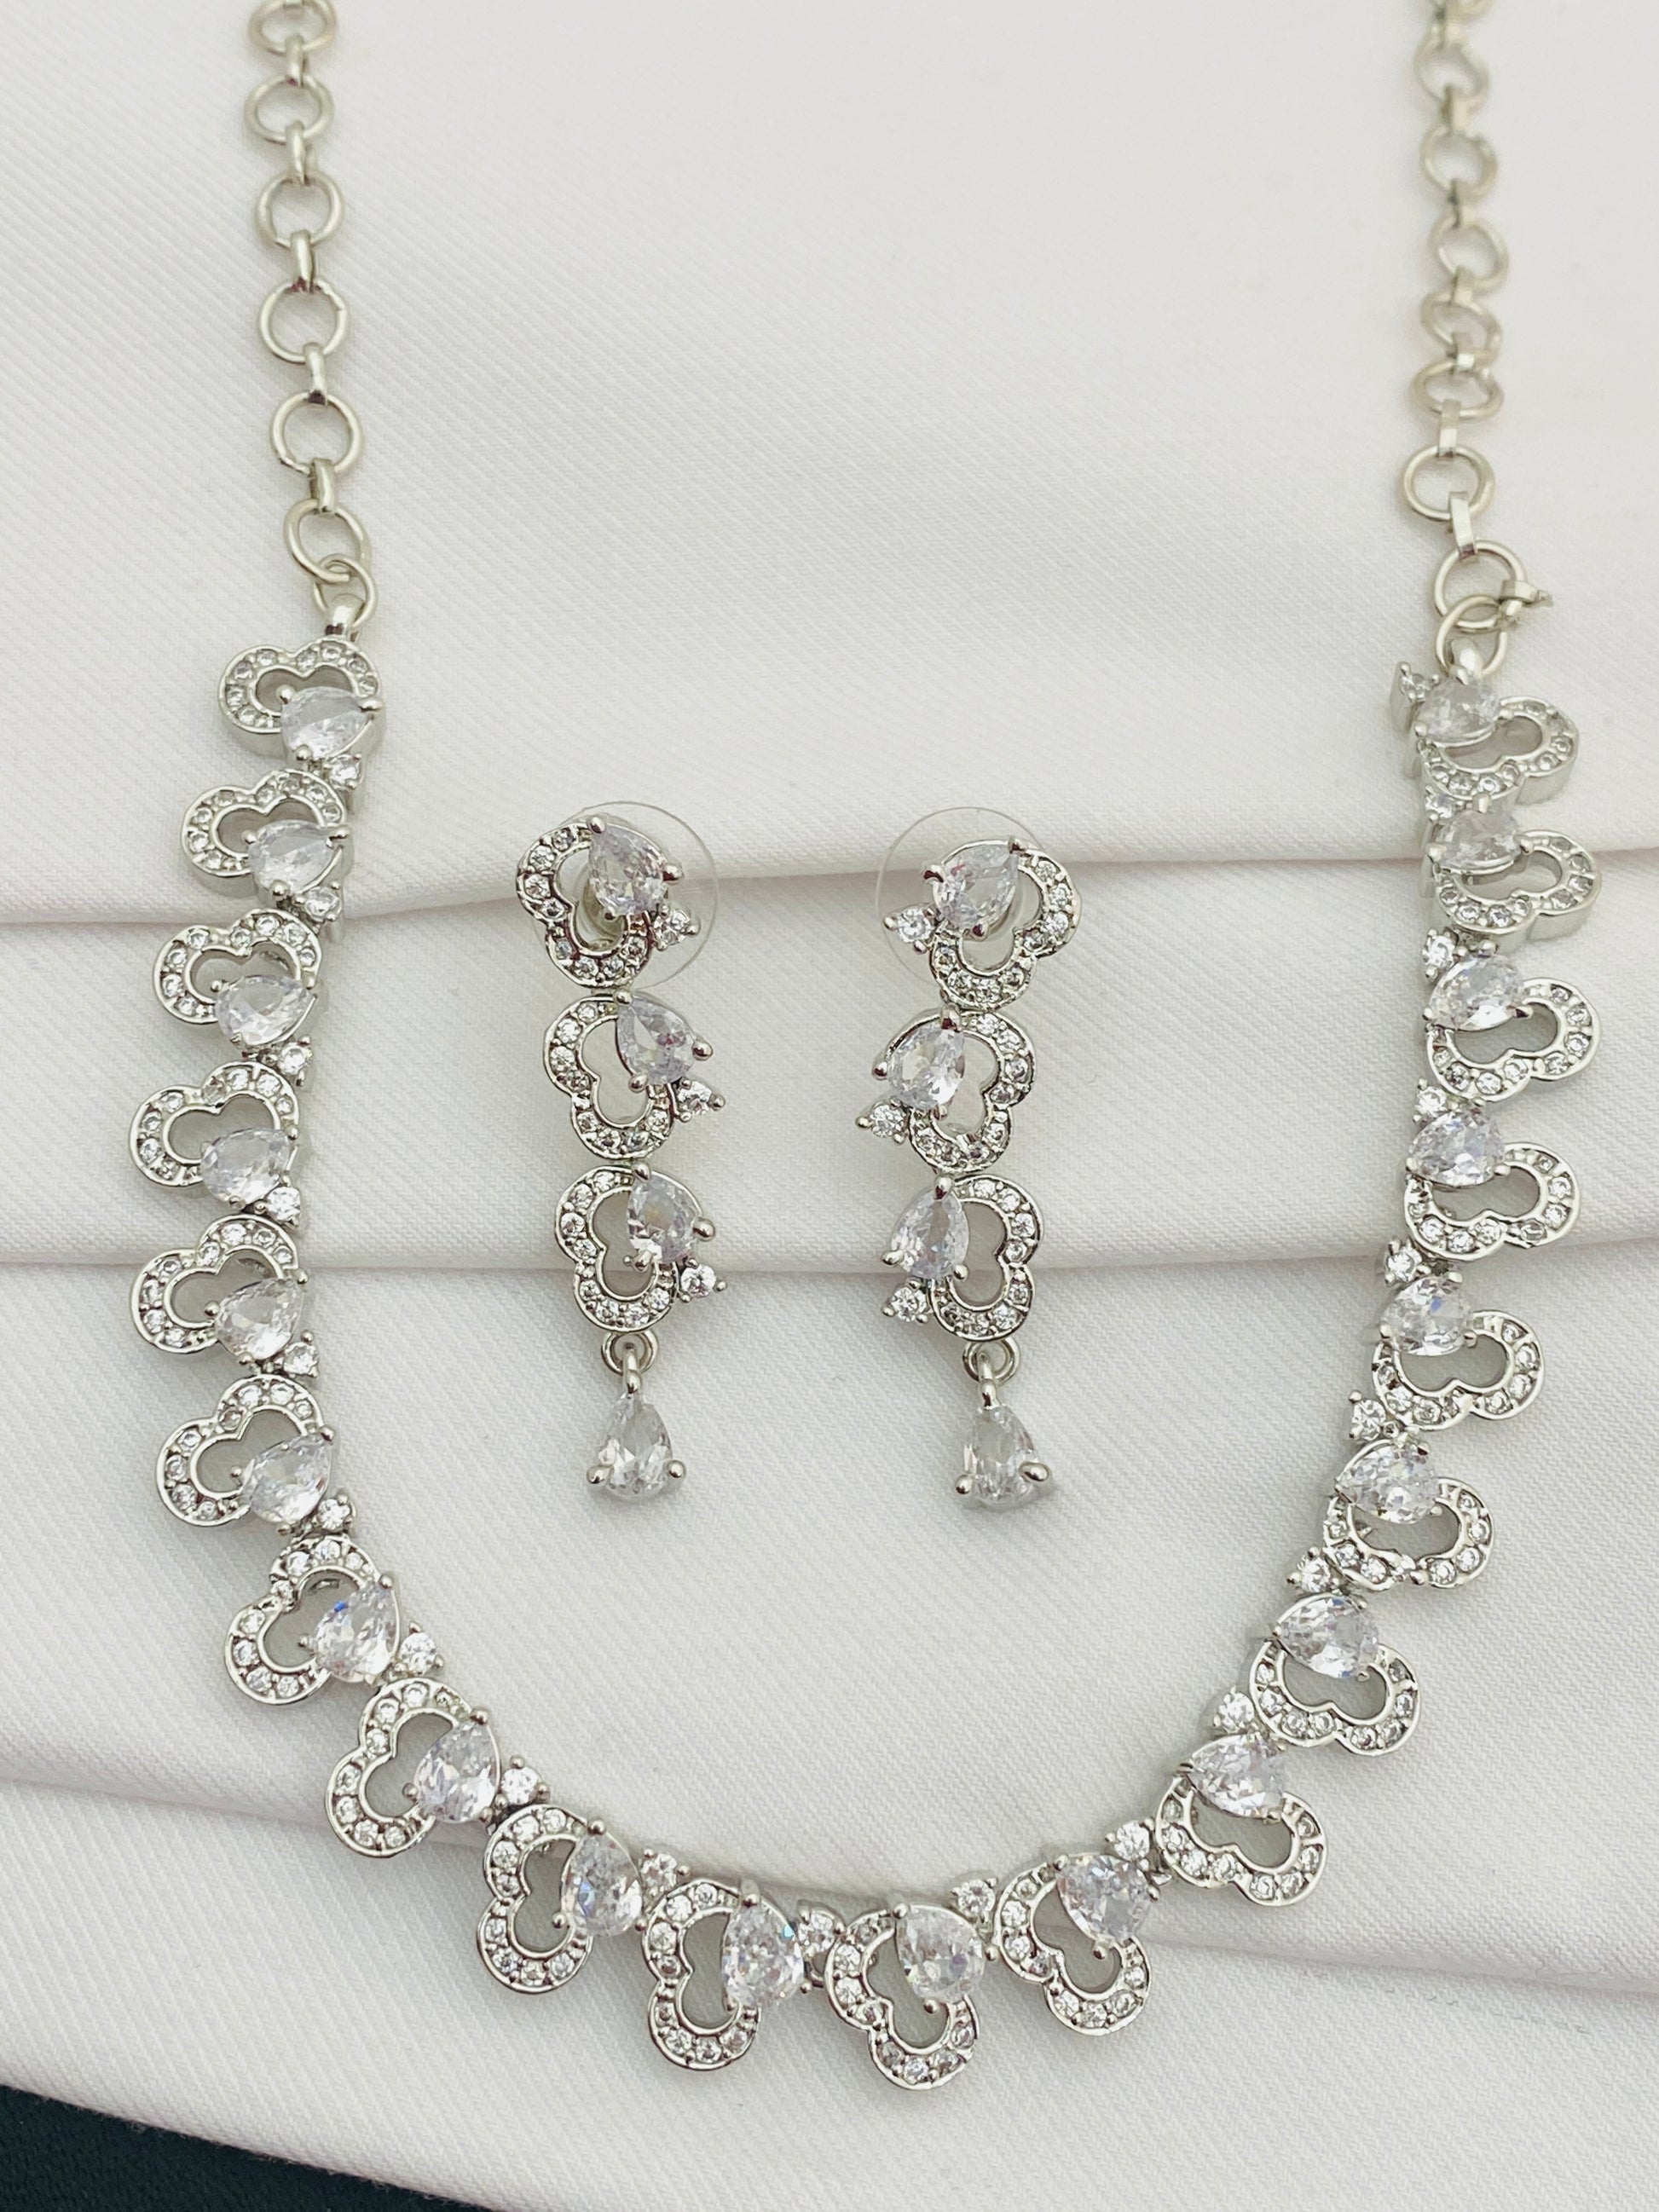  Party Wear Heart Designed Necklace And Earrings With AD Stones In Paradise Valley